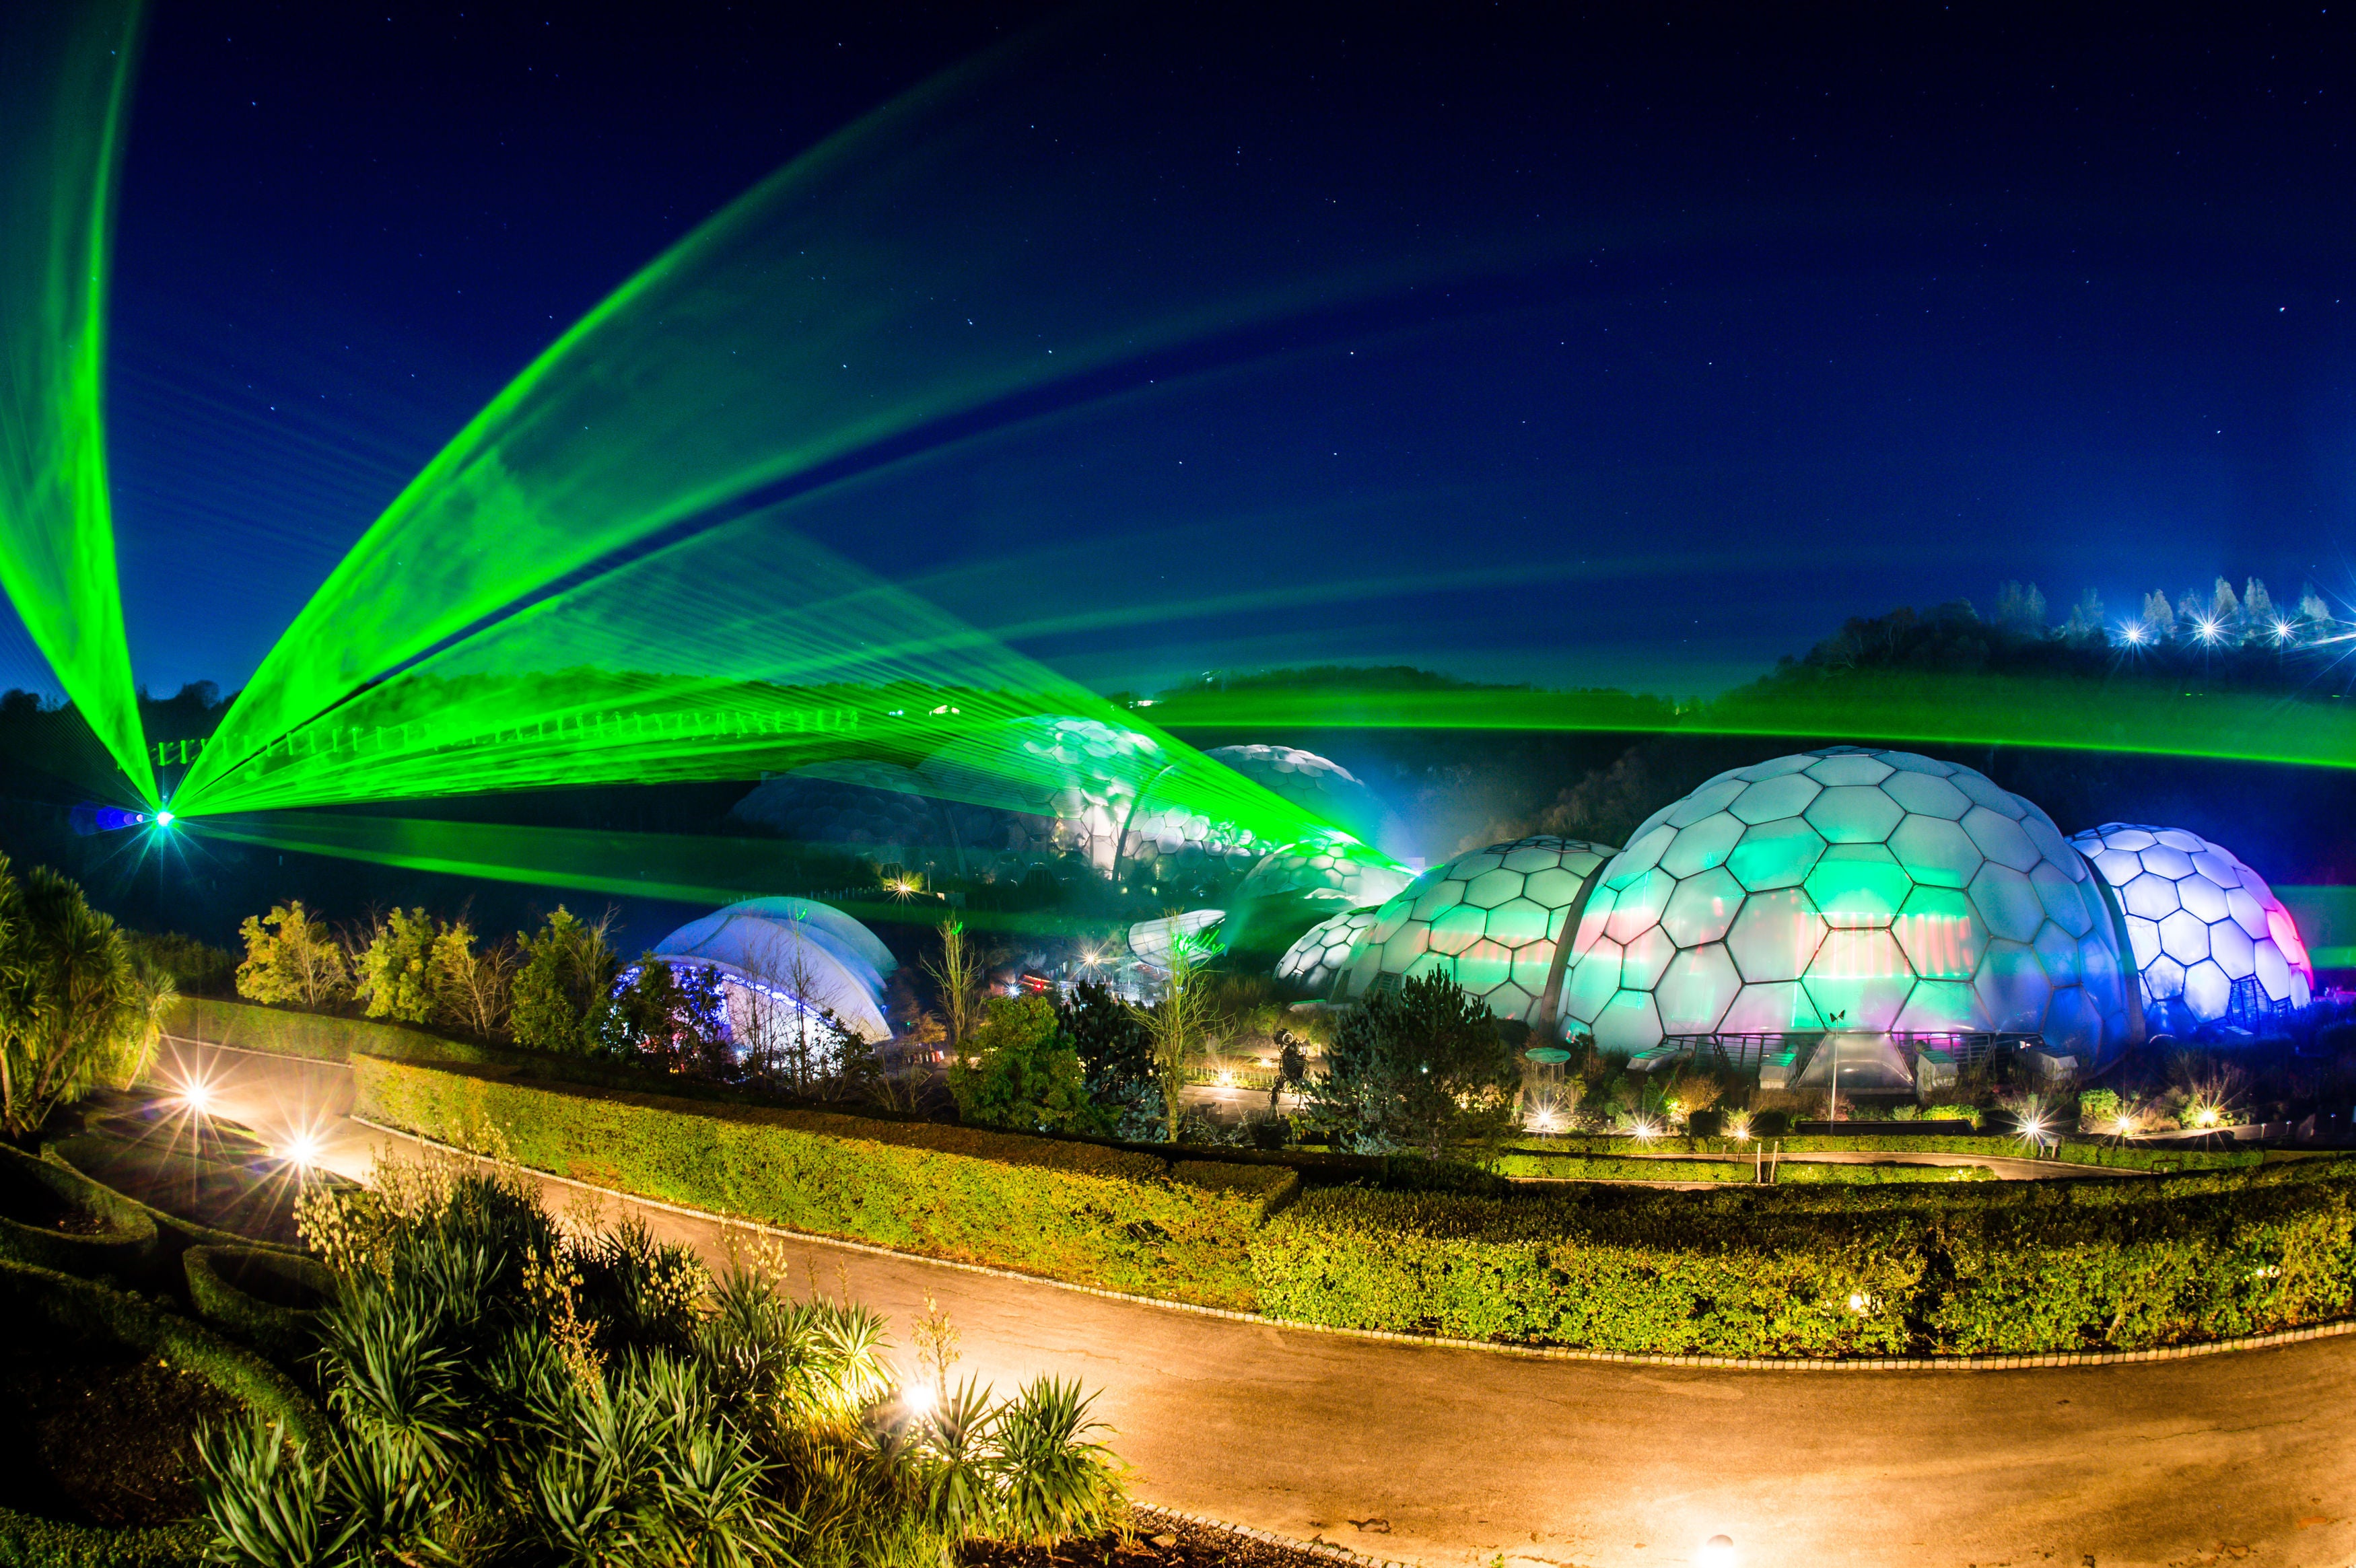 The Eden Project has drilled the deepest geothermal well in the UK.